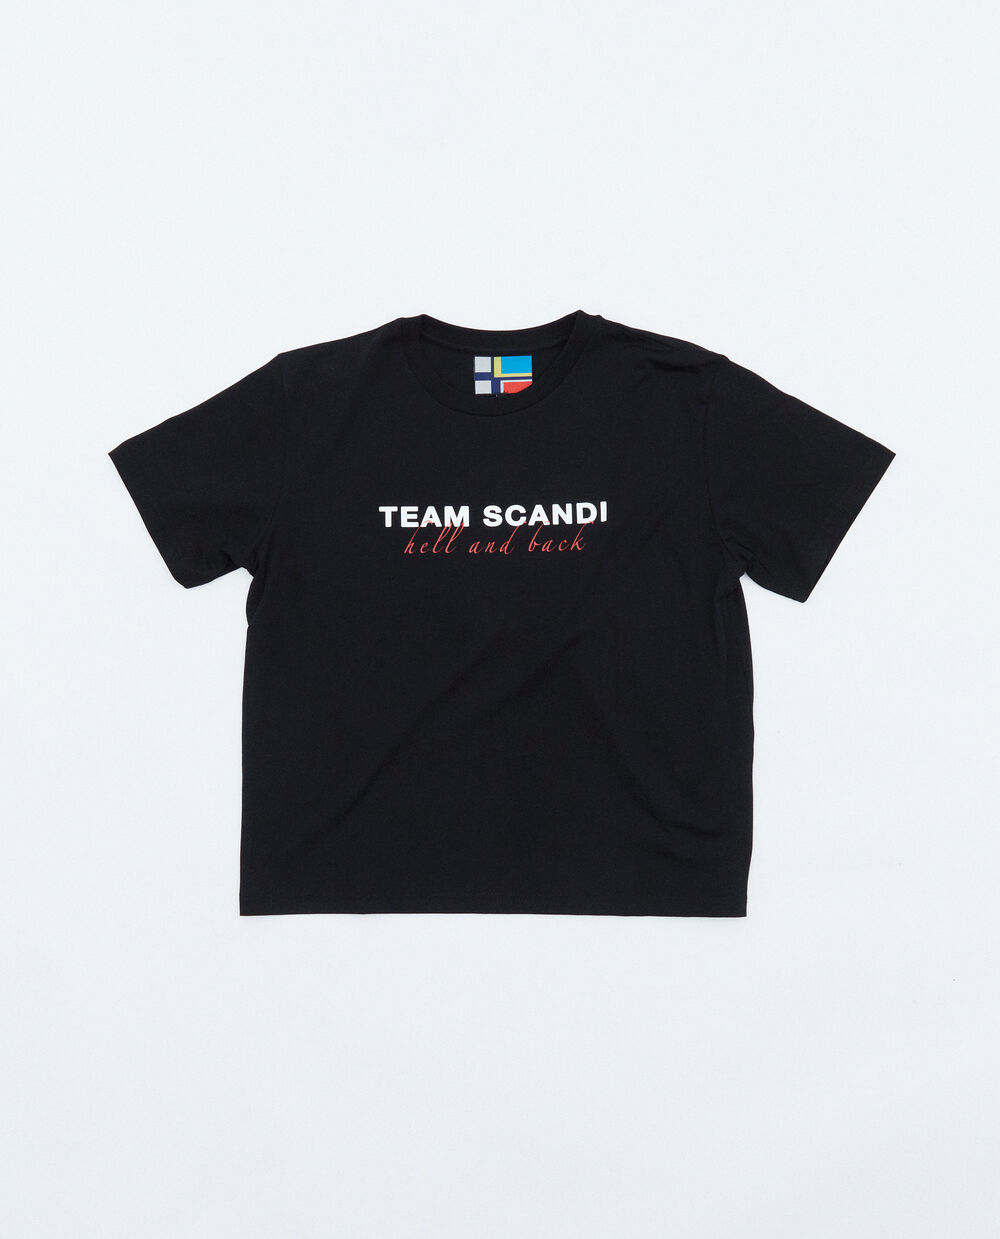 TEAM SCANDI HELL AND BACK TEE